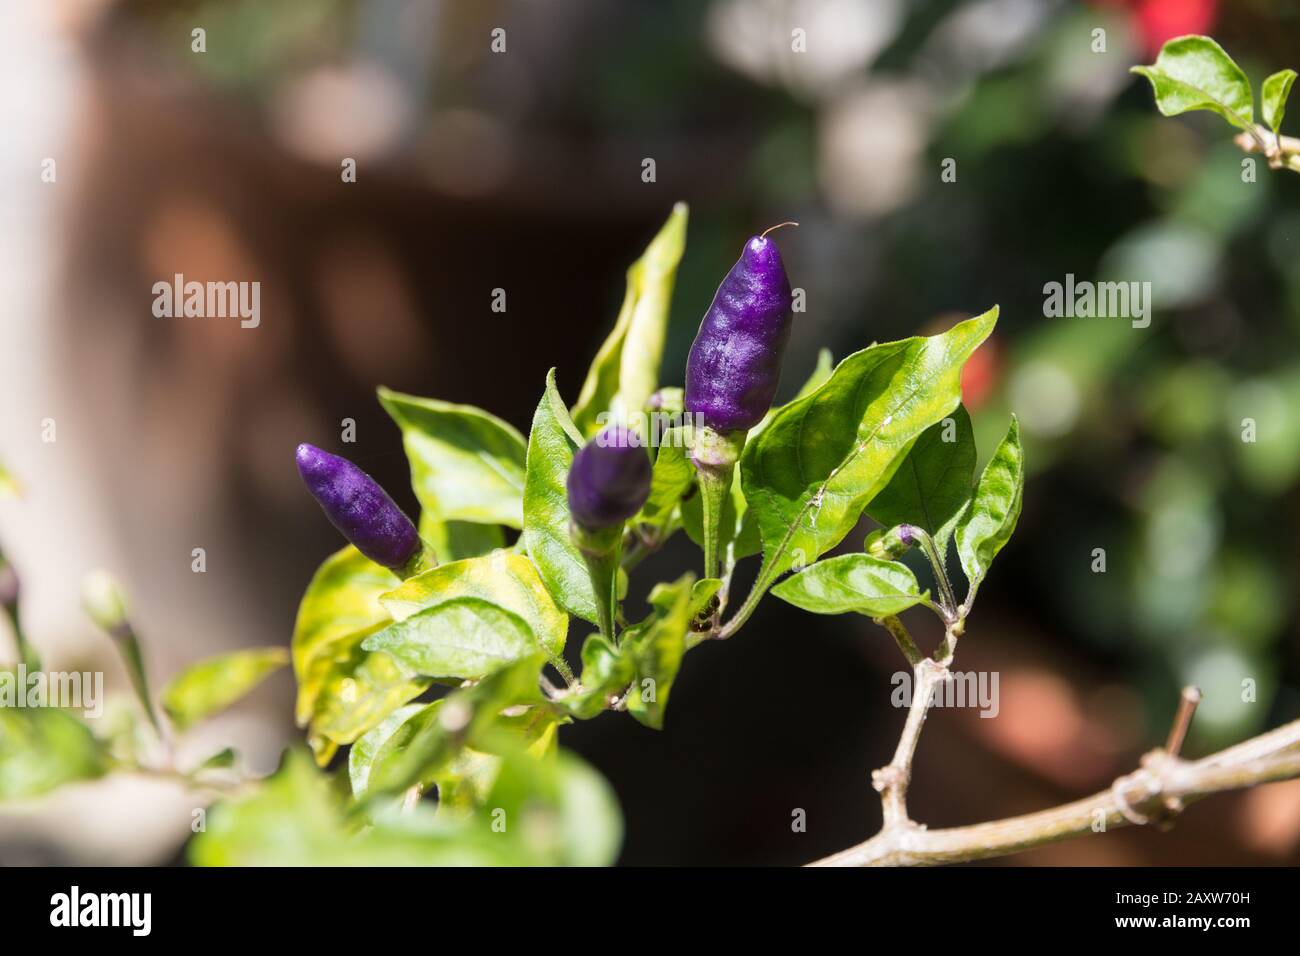 Lovely close-up view of organic purple chili peppers (Capsicum frutescens) grown in a garden in Malaysia. It is used extensively in the South Asian... Stock Photo